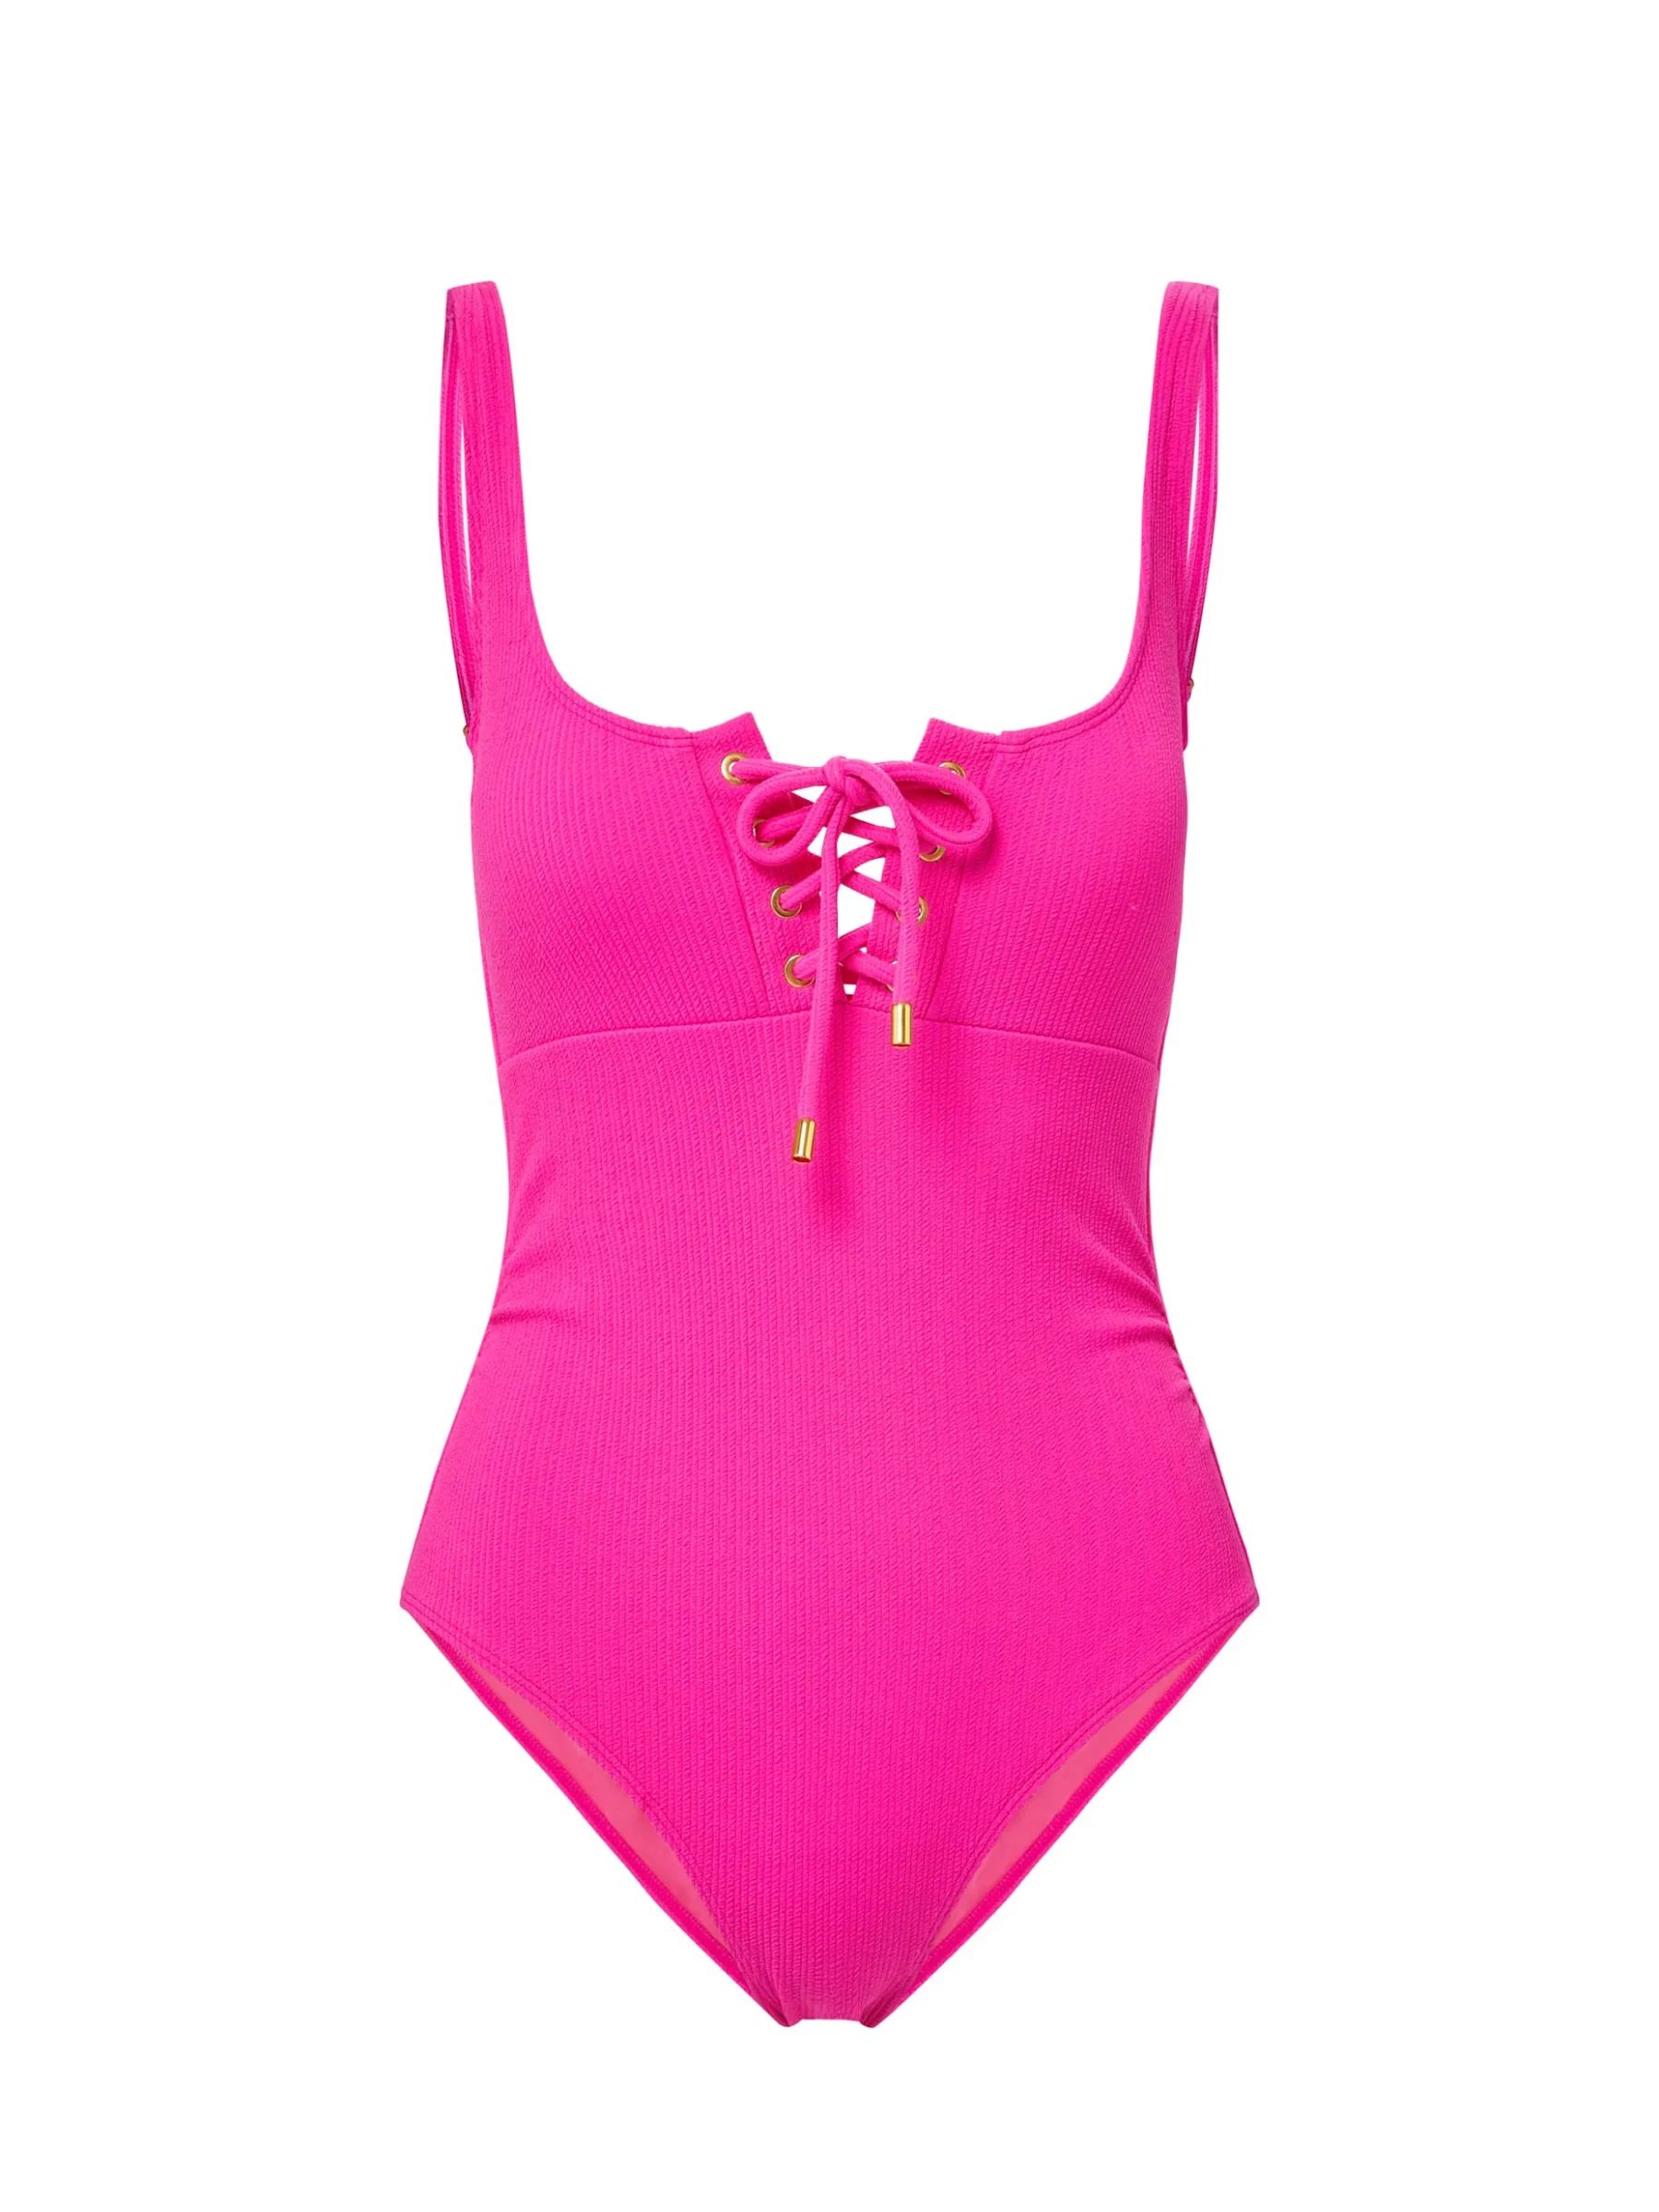 Taylor One Piece Shocking Pink Texture | Change of Scenery